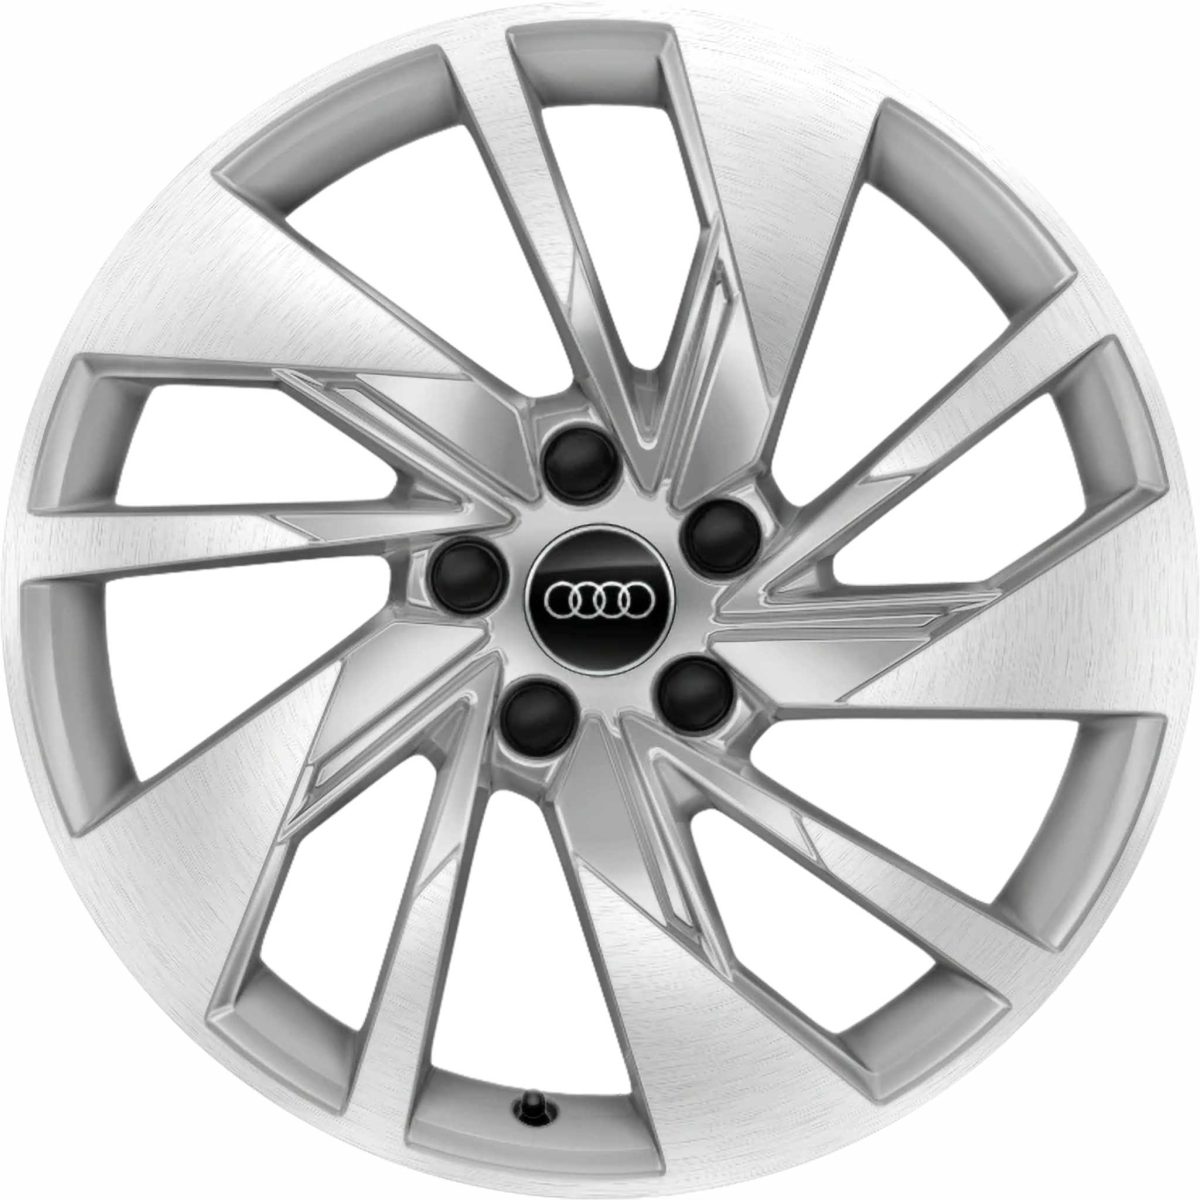 Genuine Audi A3 S3 8Y 5 Double Spoke 18" Inch Alloy Wheels with Silver & Diamond Turned Finish 8Y0 601 025 F